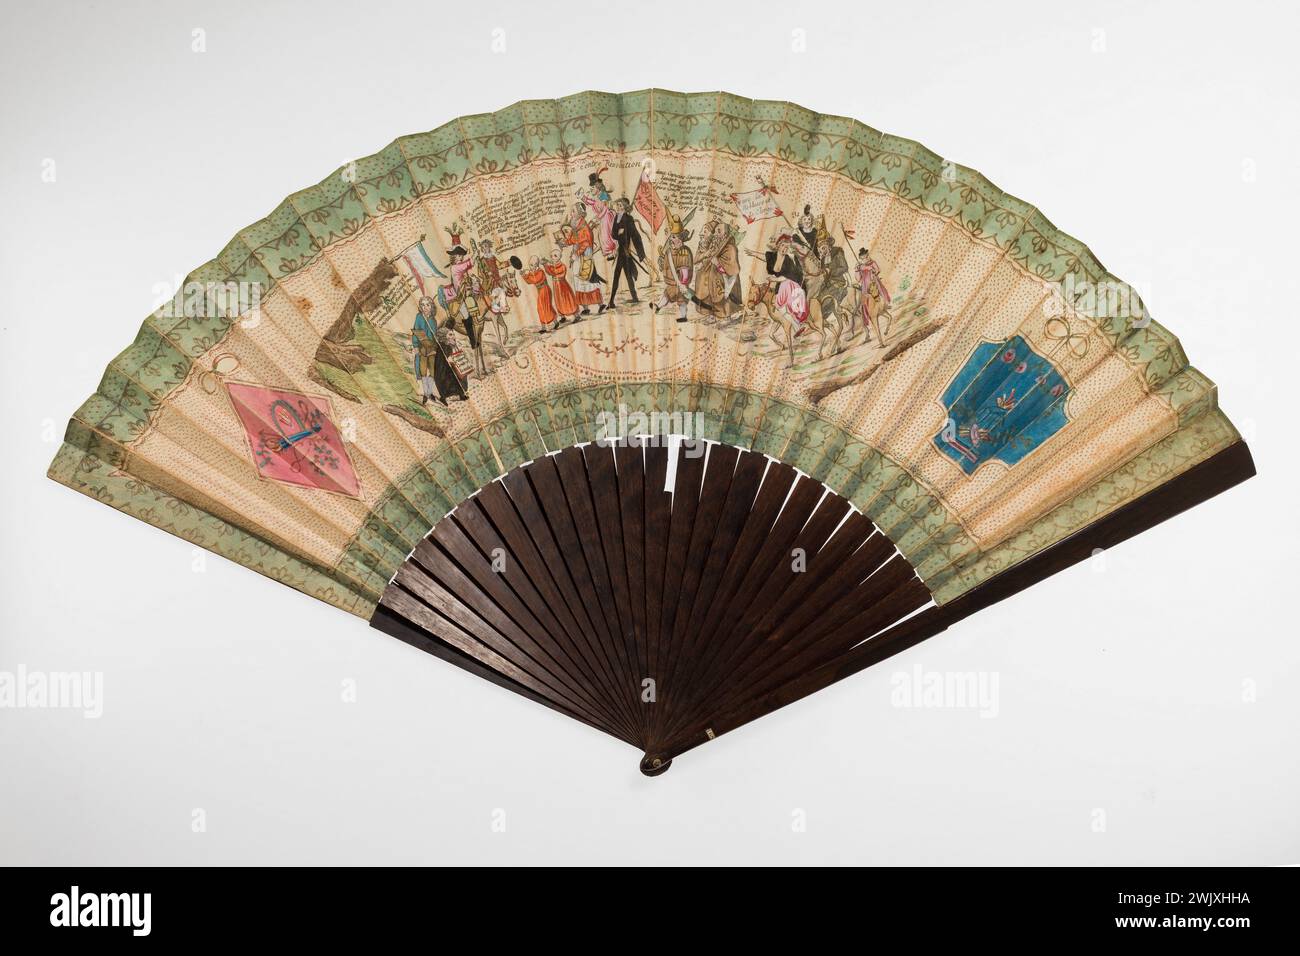 EVENTAIL. 'The counter-revolution'. Folded, wood, print. Paris, Carnavalet museum. 99103-3 Fashion accessory, Event, Revolutionary Periode, French Revolution Stock Photo